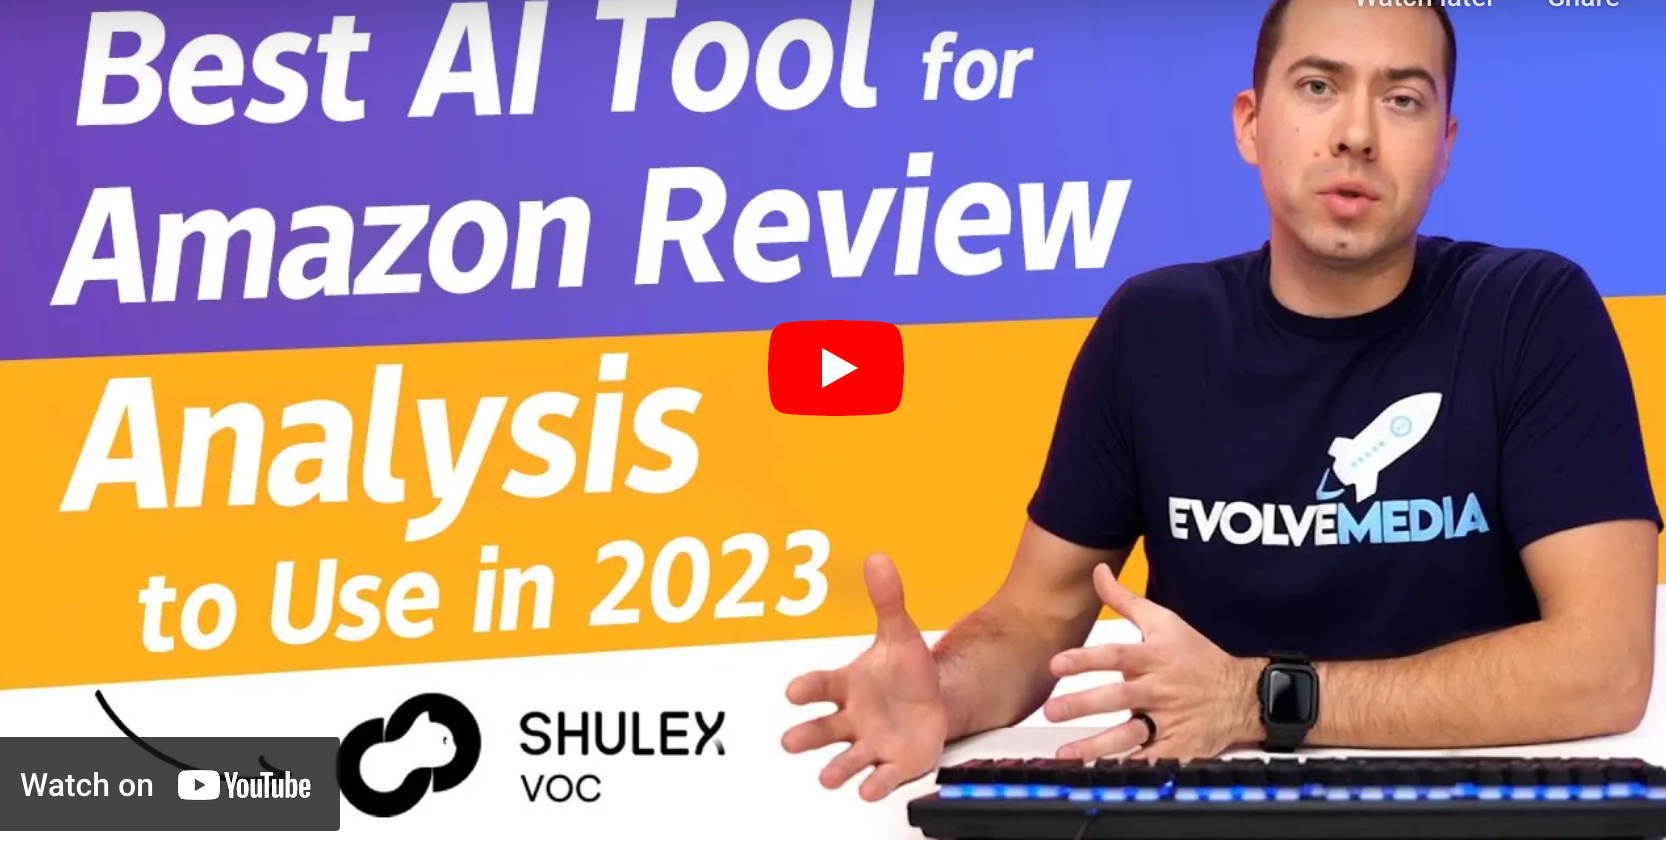 Revolutionizing the Way We Shop: The Impact of Amazon Product Reviews in 2023